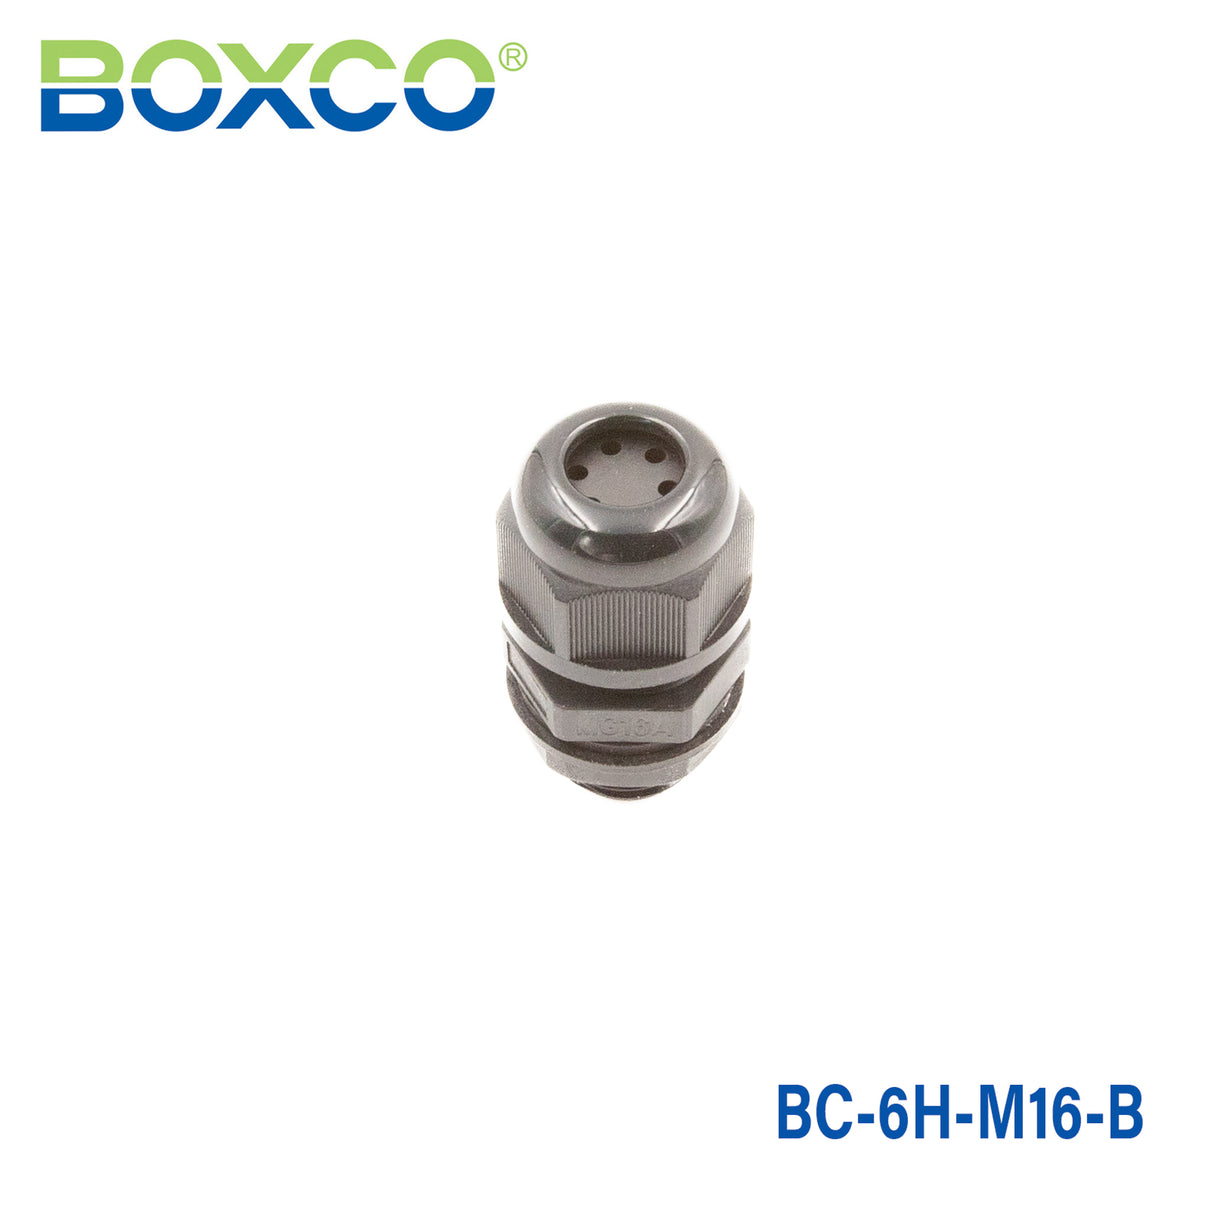 Boxco BC-6H-M16-B Rubber Cable Gland Grommet 1~2 mm Hole Ivory